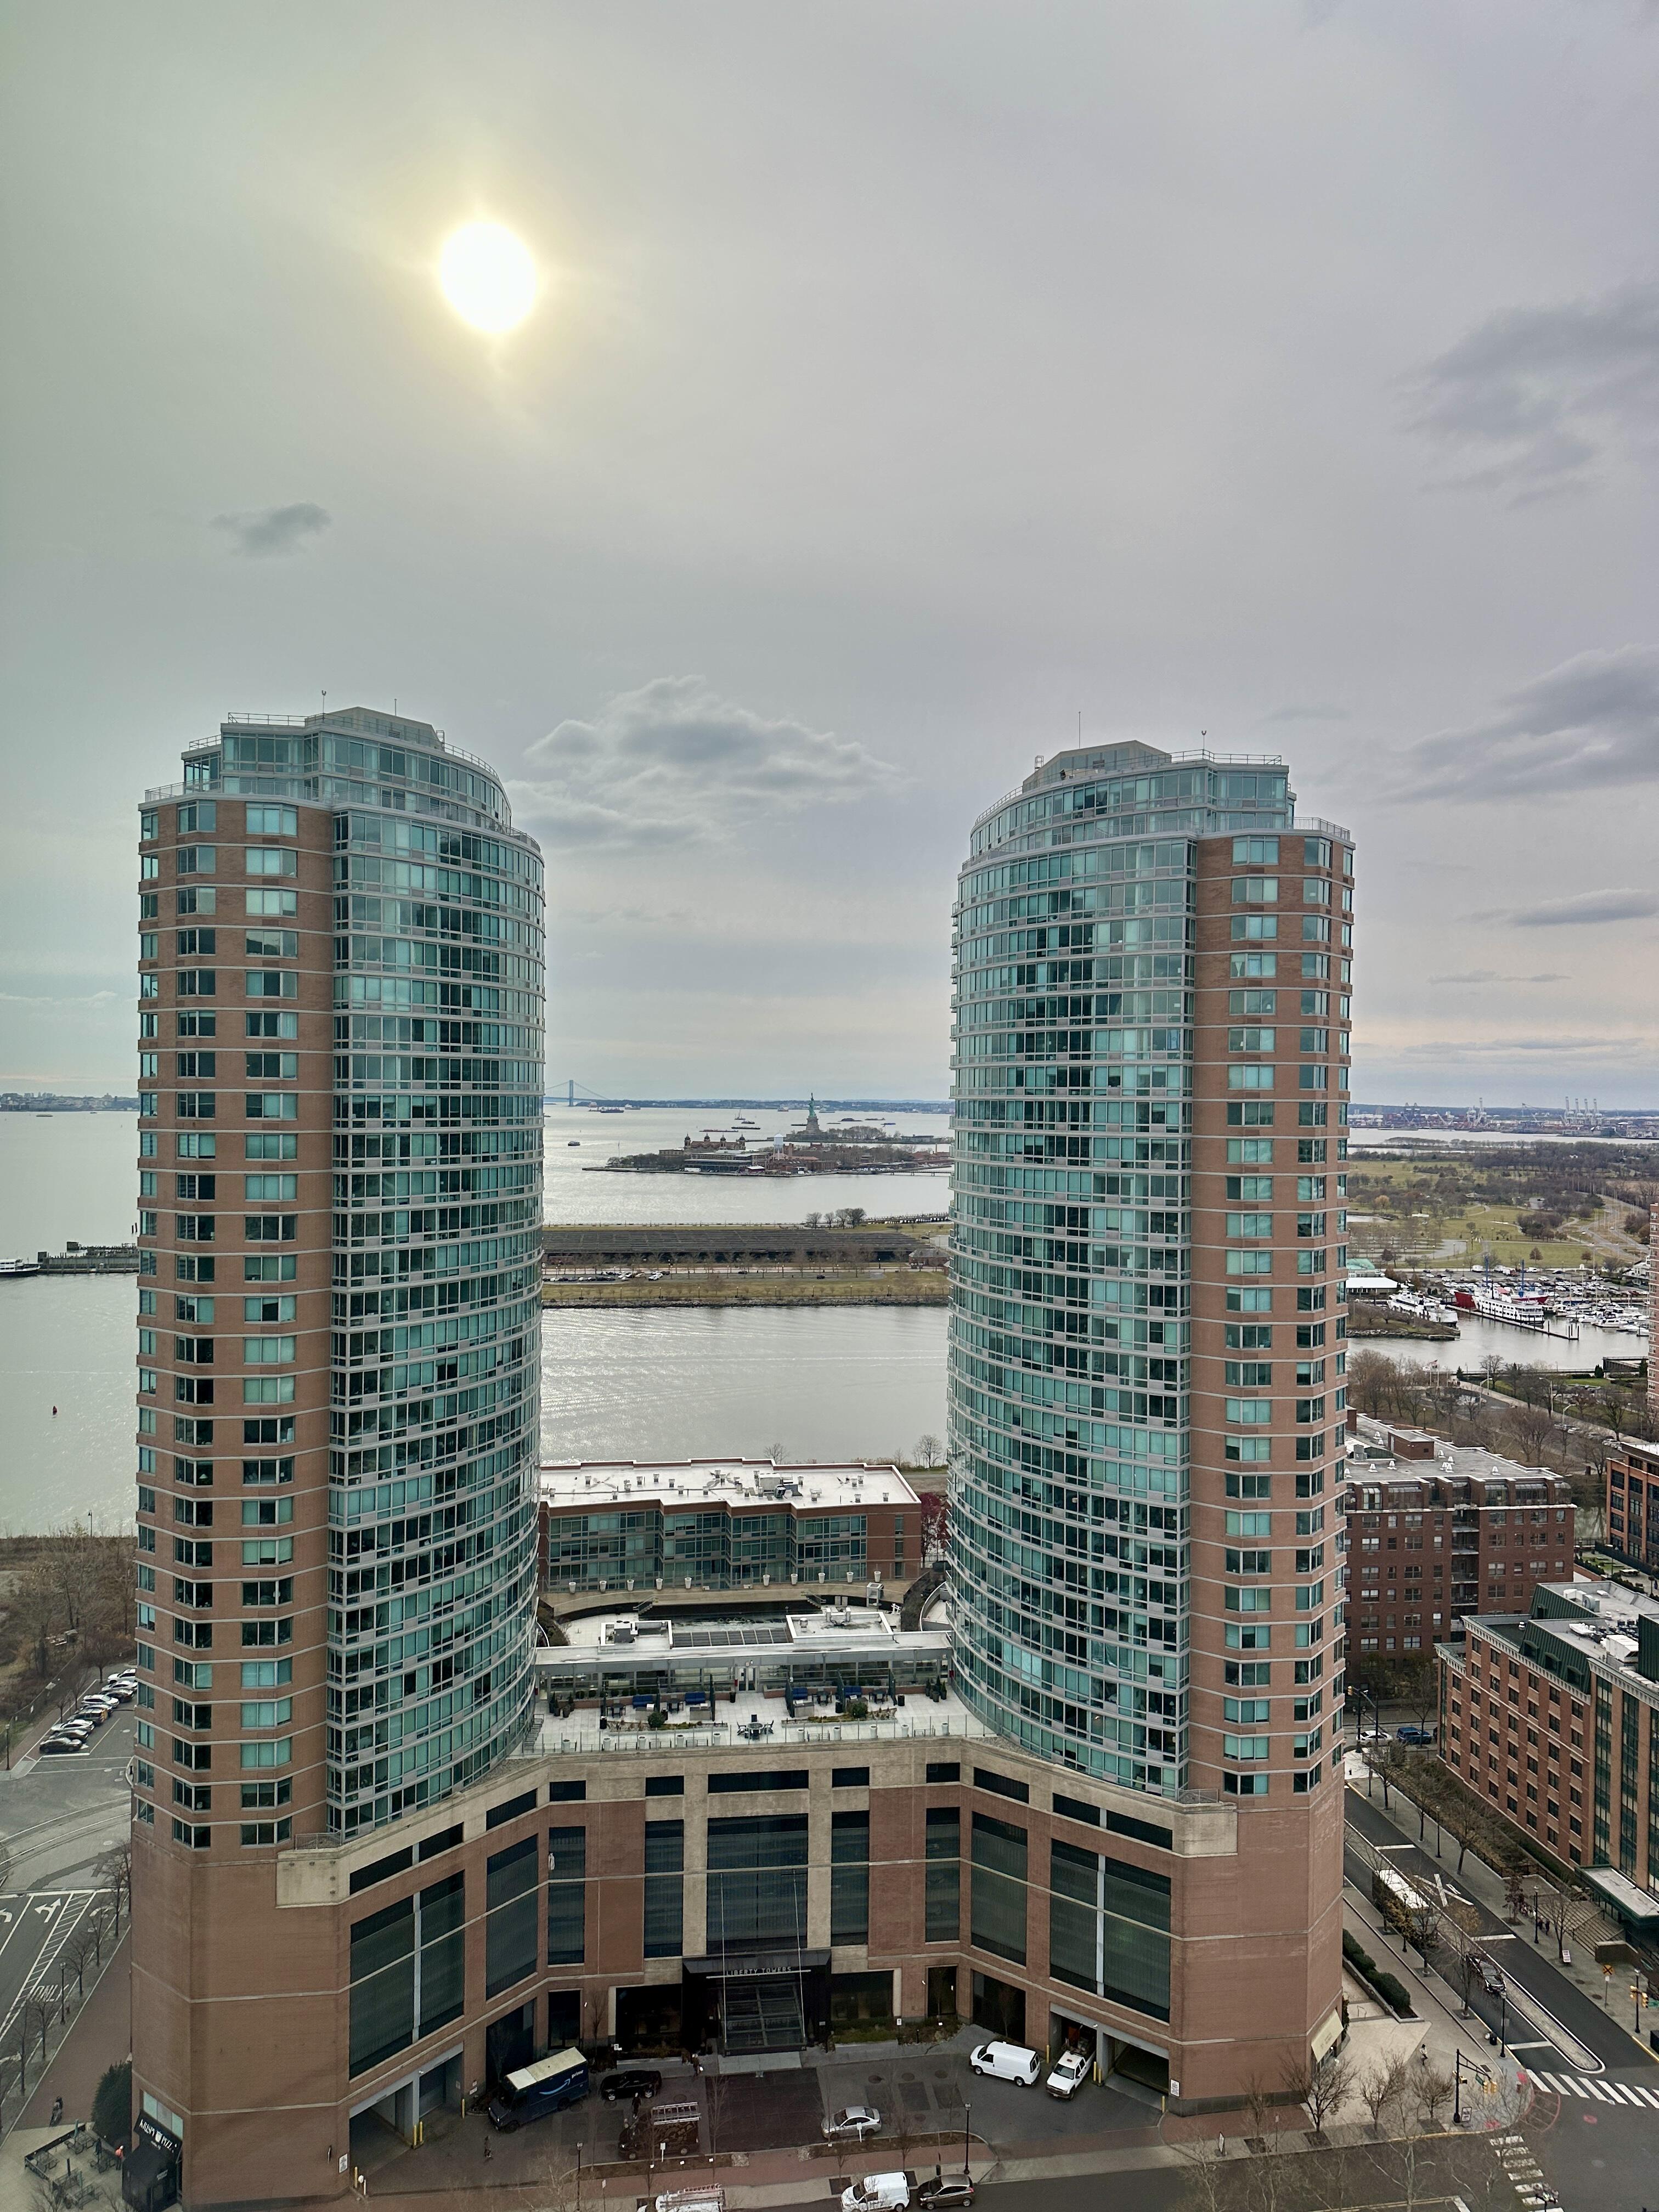 77 Hudson Condos in Downtown Jersey City, NJ 07302 - Michael Kotler Realtor - Condos For Sale and Apartments For Rent - Hudson River View